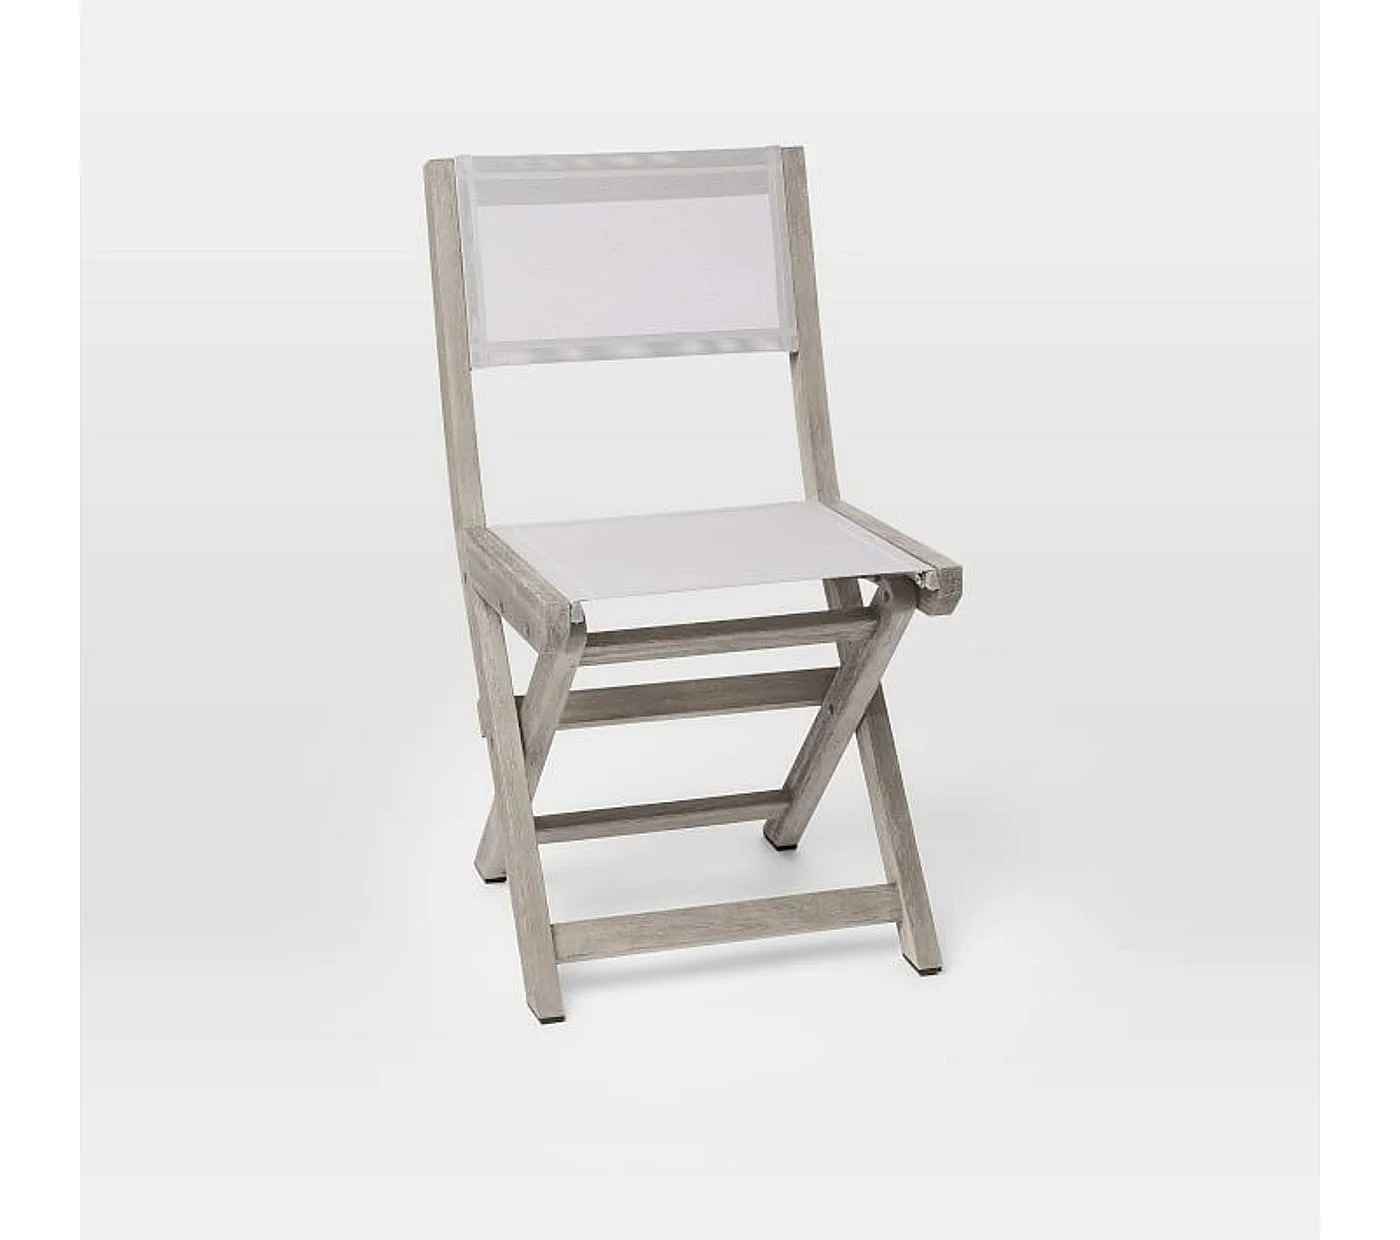 Ortside Bistro Folding Chairs